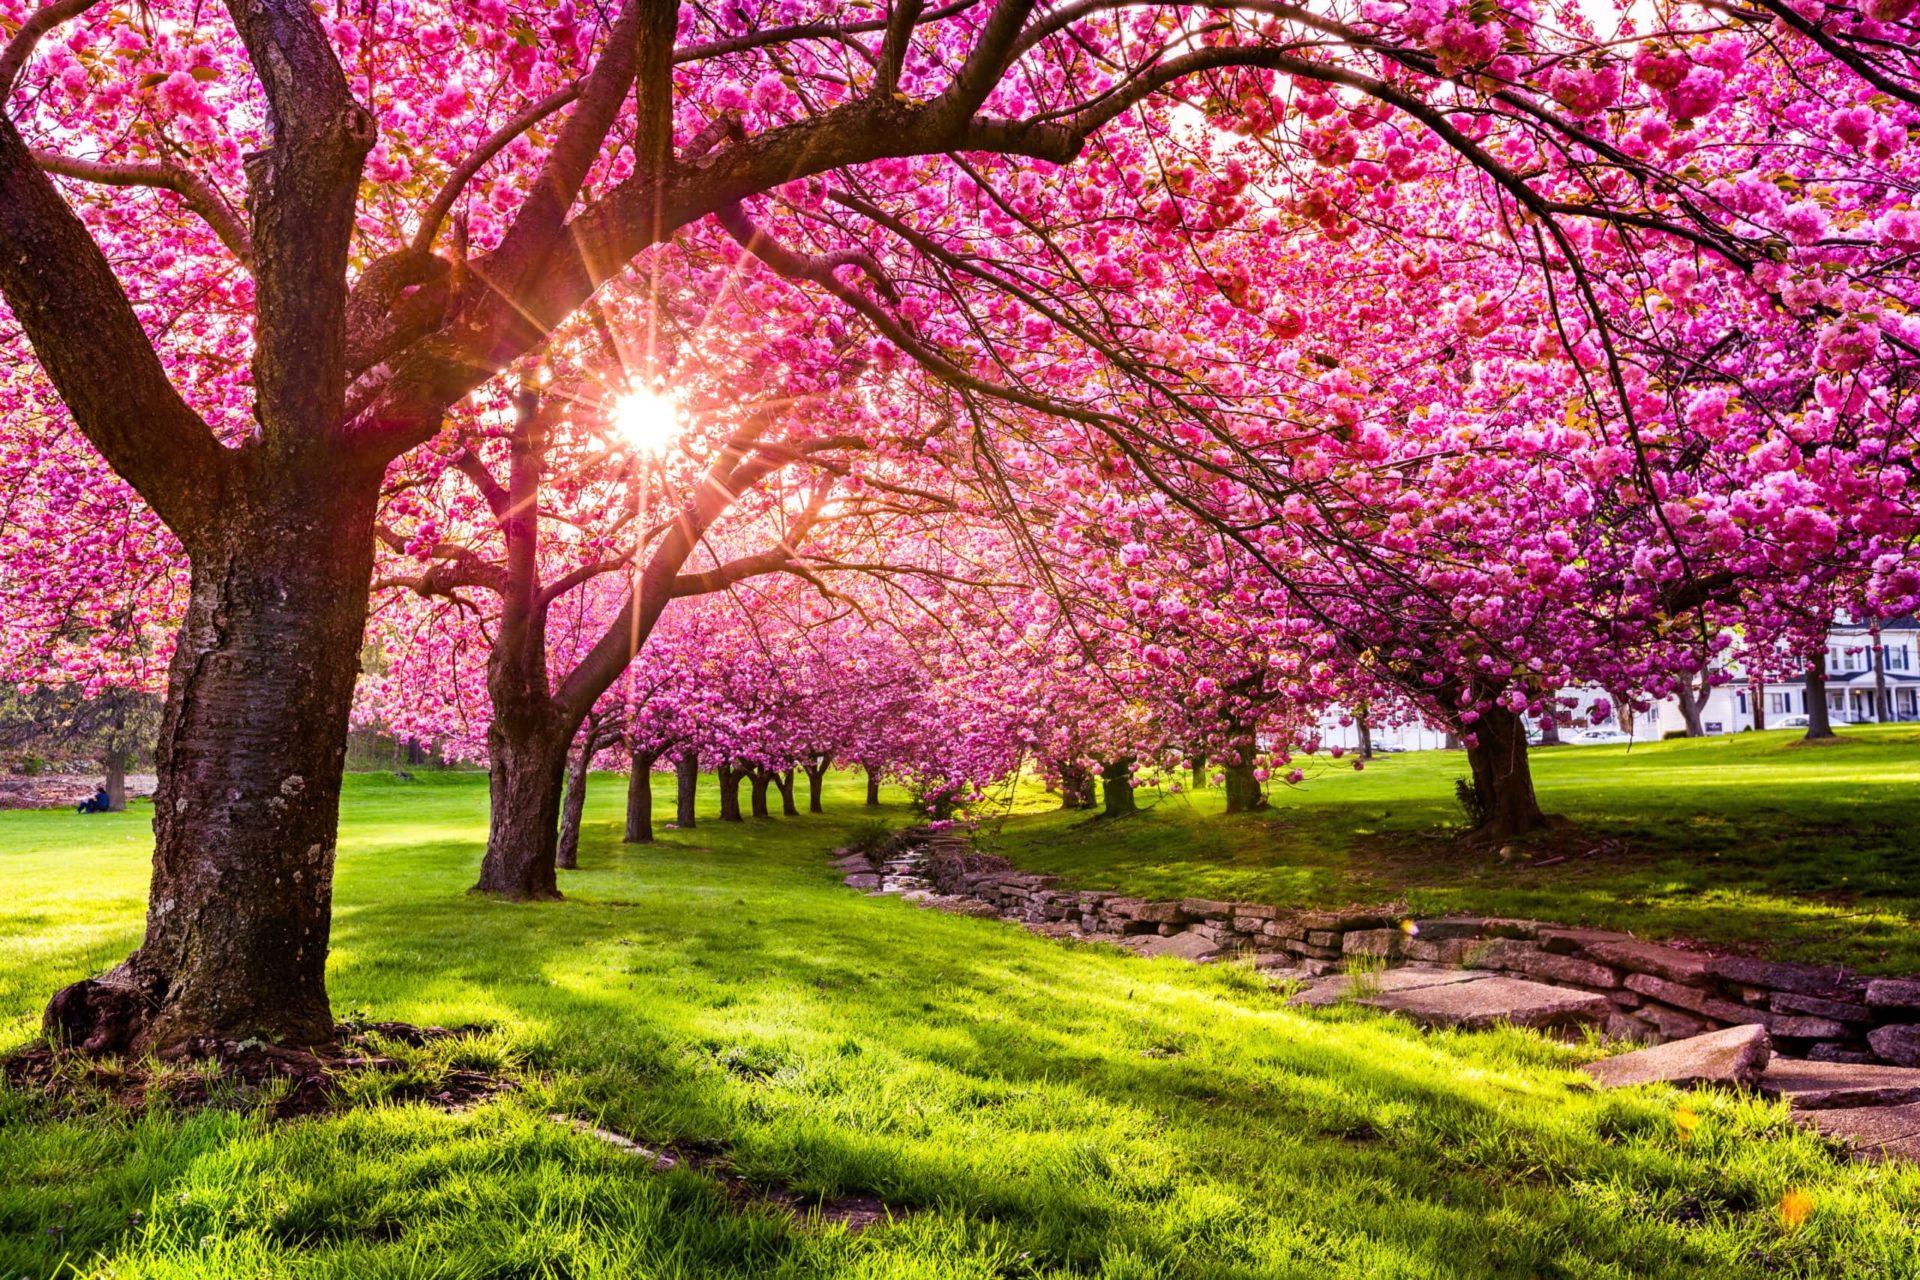 25 Cherry Blossoms Facts - Things You Didn't Know About Cherry Blossom Trees